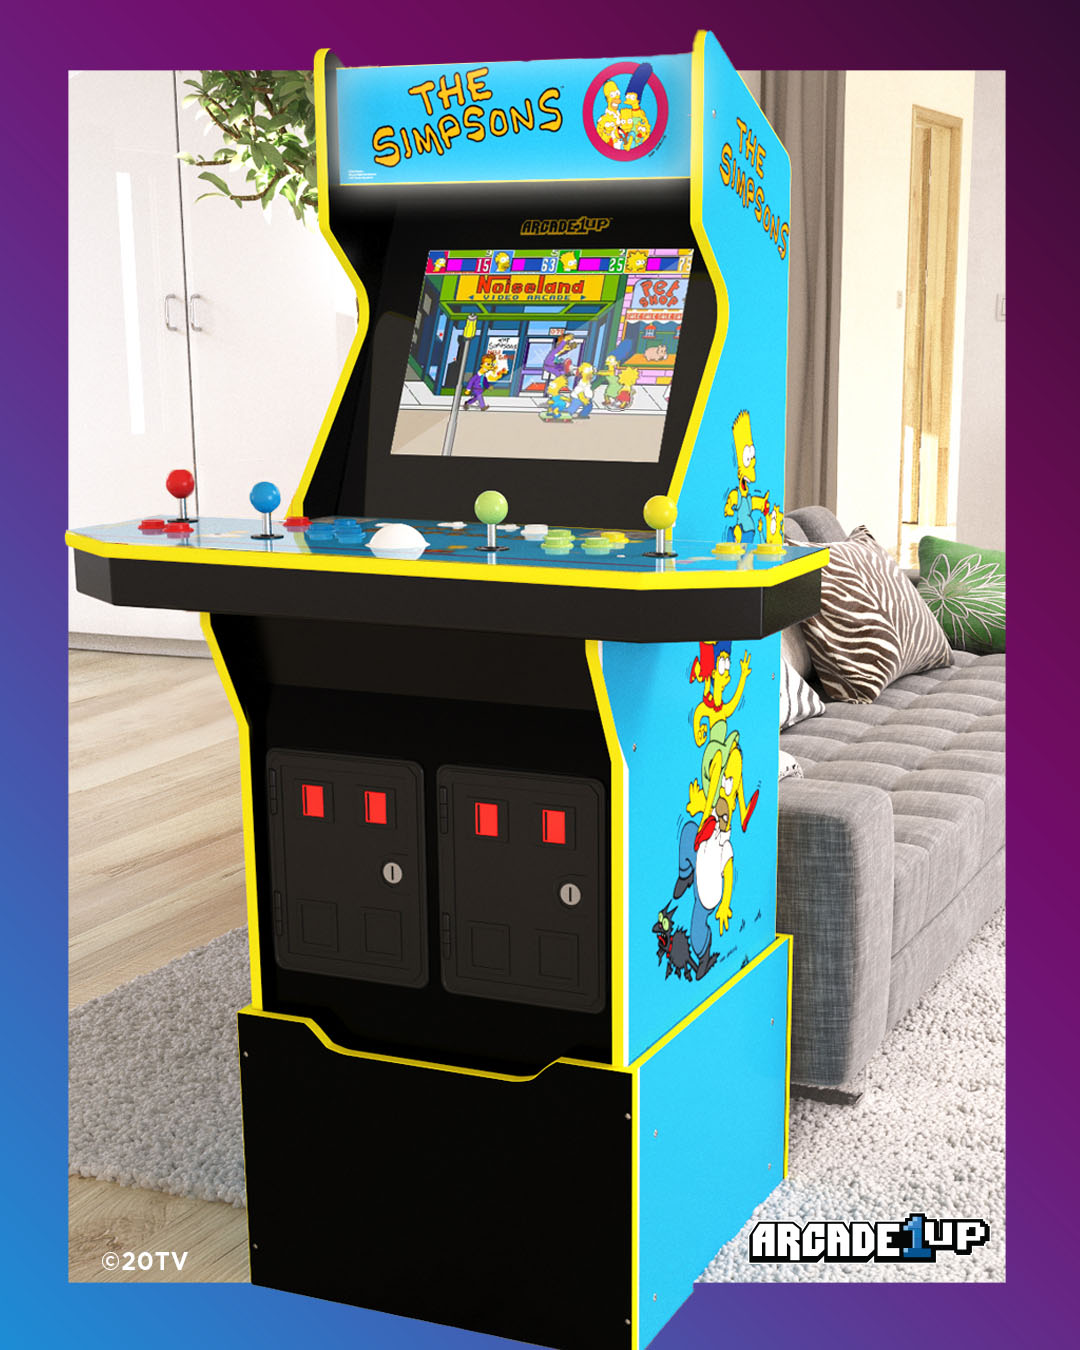 Arcade1Up, The Simpsons Arcade With Riser - image 4 of 11